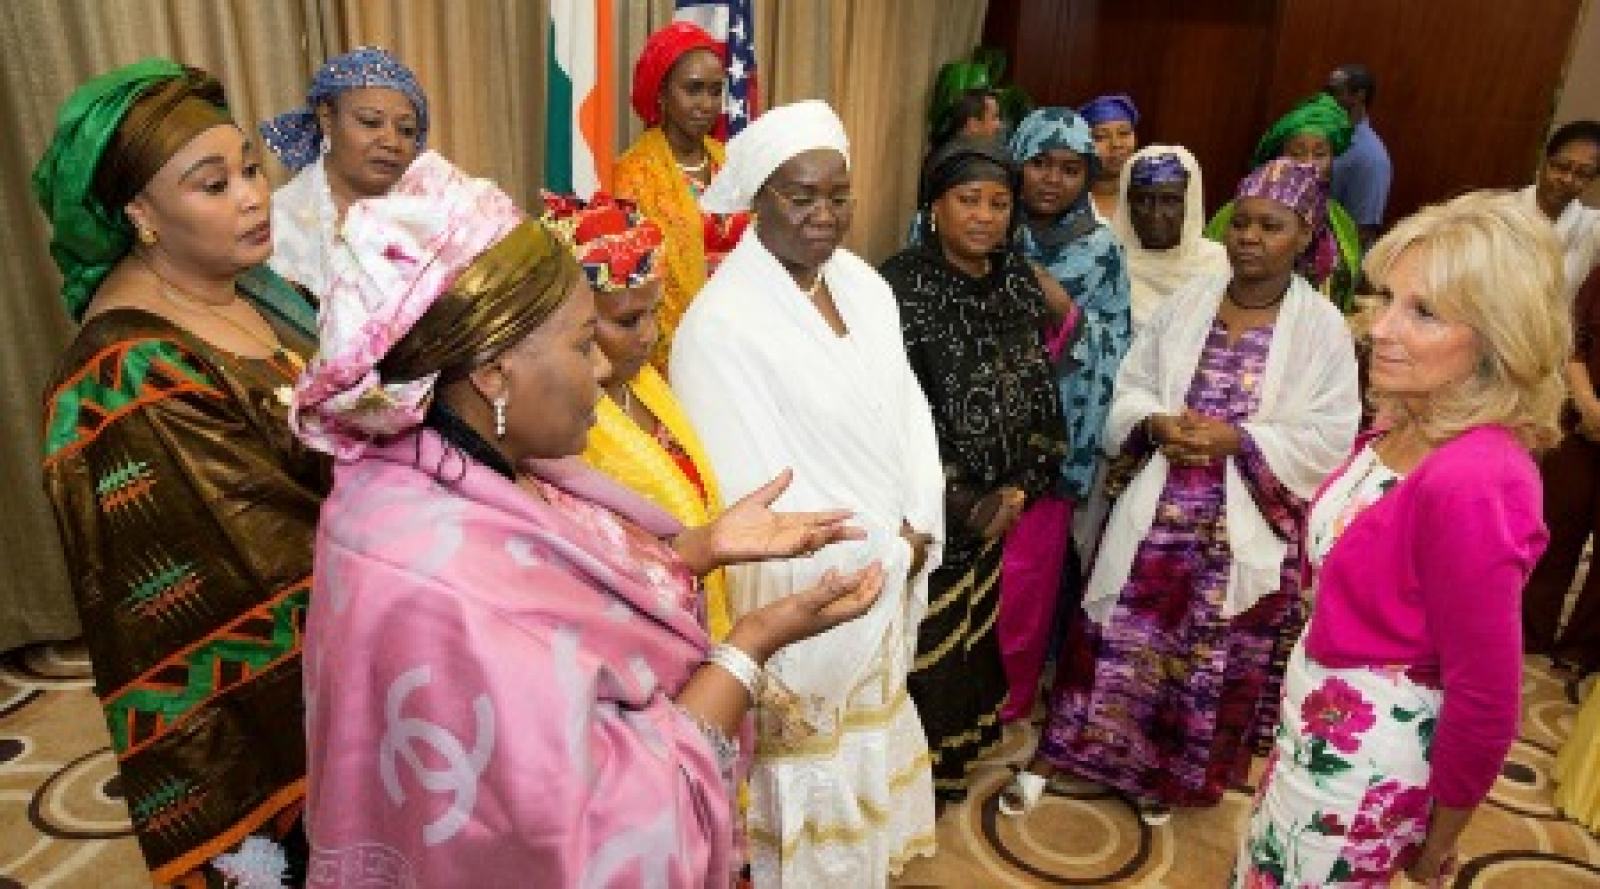 NDI Facilitates Meeting of Dr. Jill Biden with Women Elected Leaders in Niger